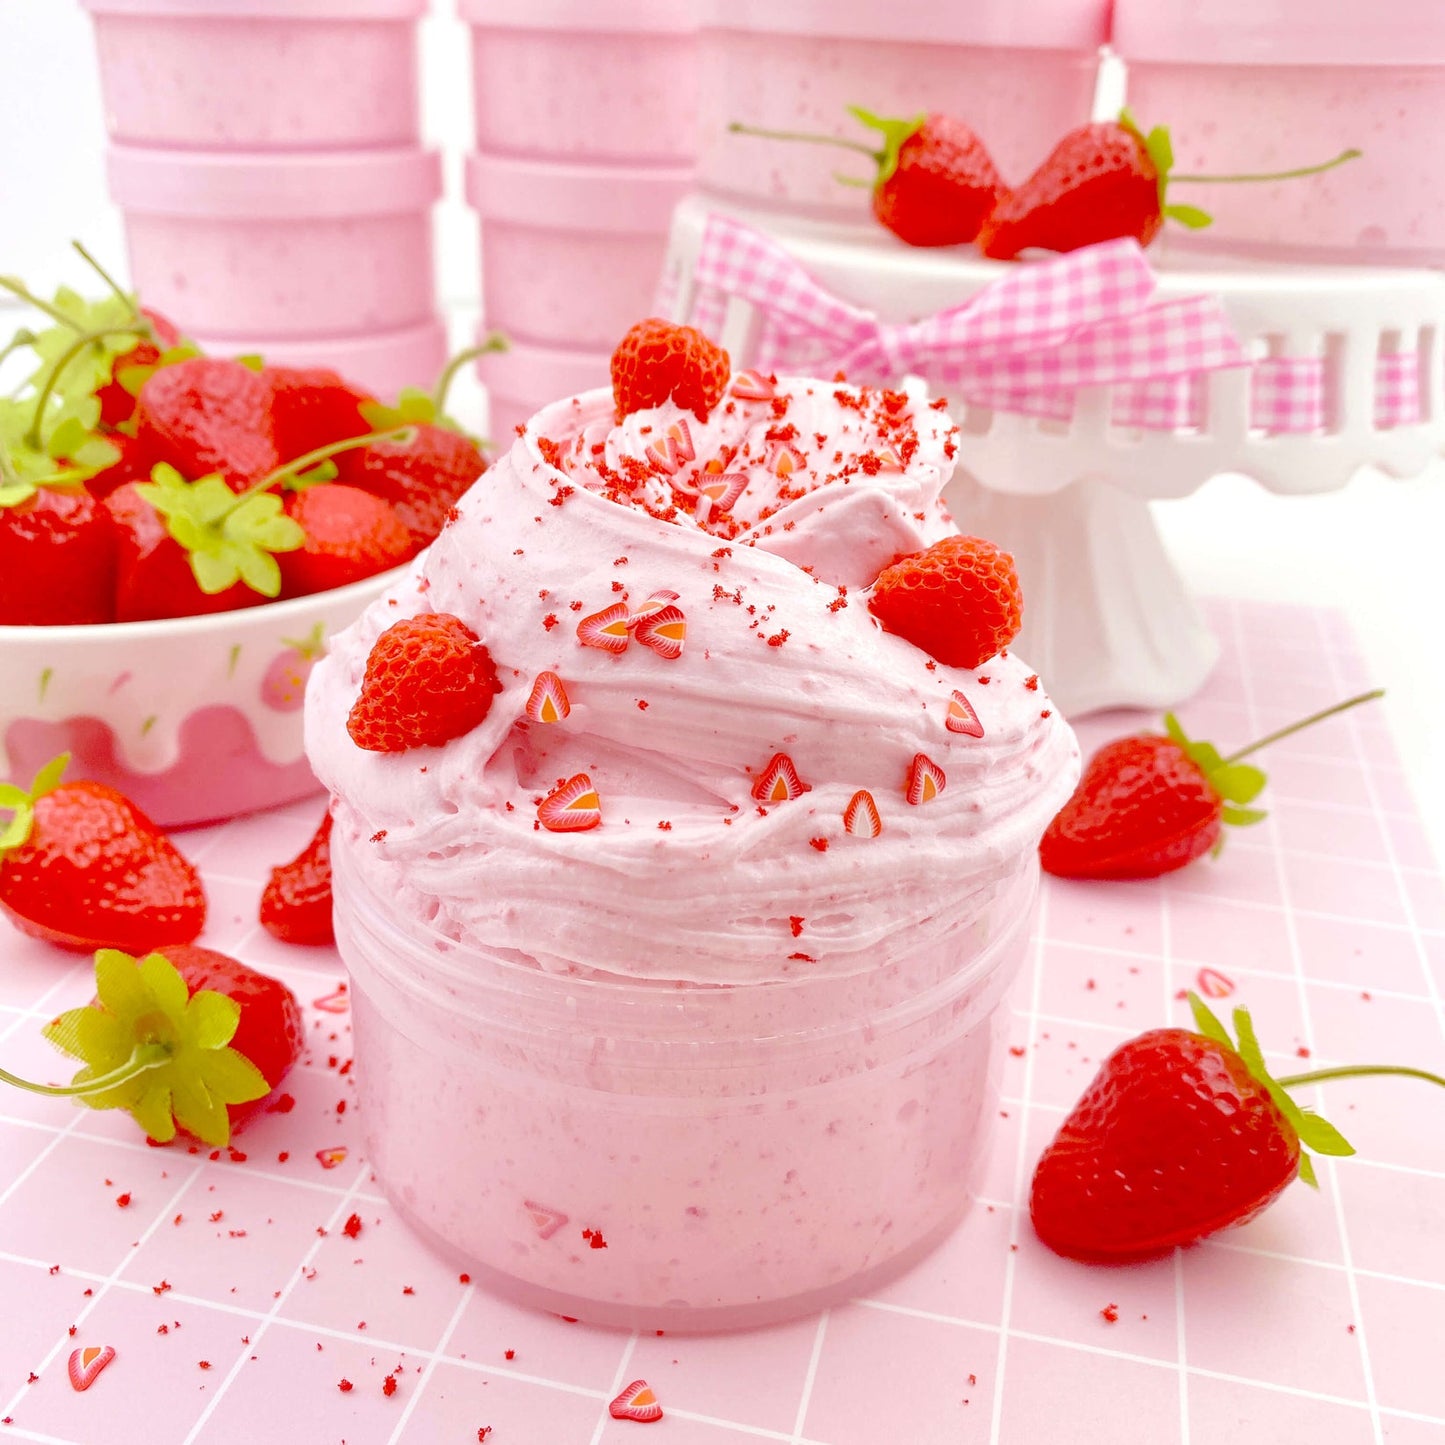 Strawberry Mousse Fluffy Butter Slime